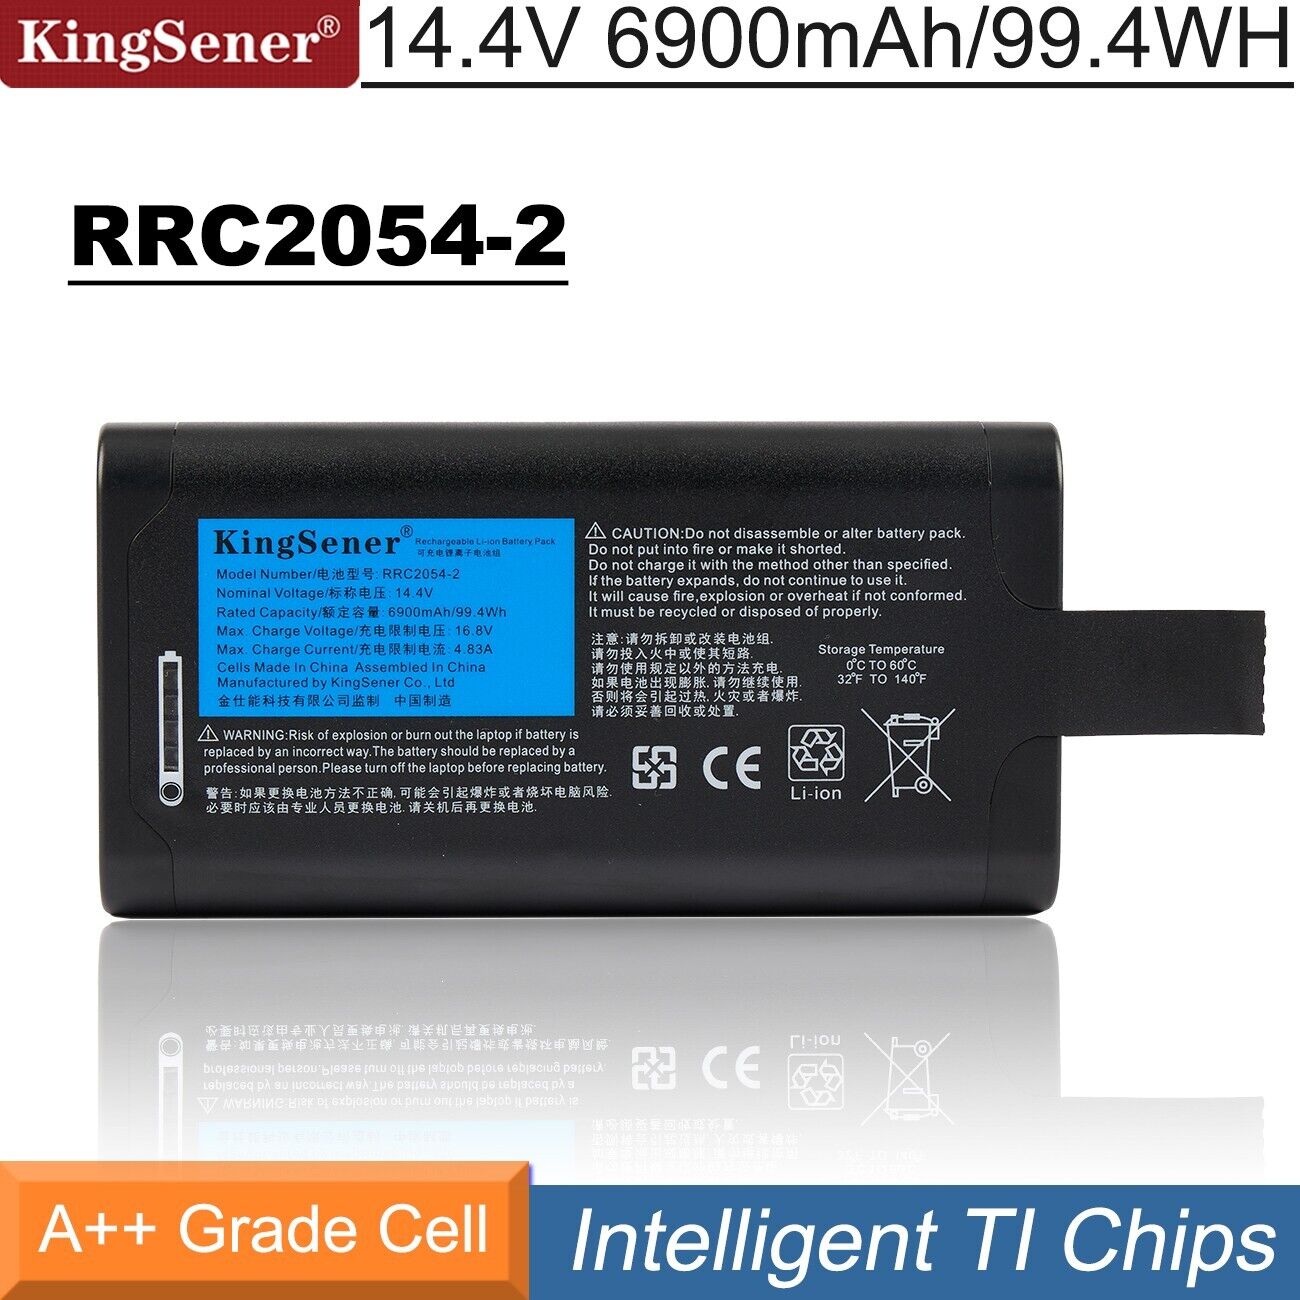 RRC2054-2 Smart Battery For RRC Power Solutions Rechargeable Standar 99.4WH